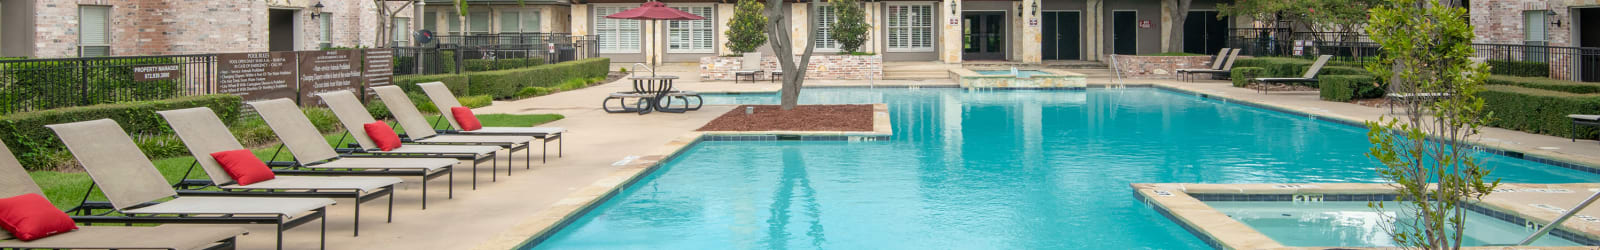 Schedule a tour at The Springs of Indian Creek in Carrollton, Texas